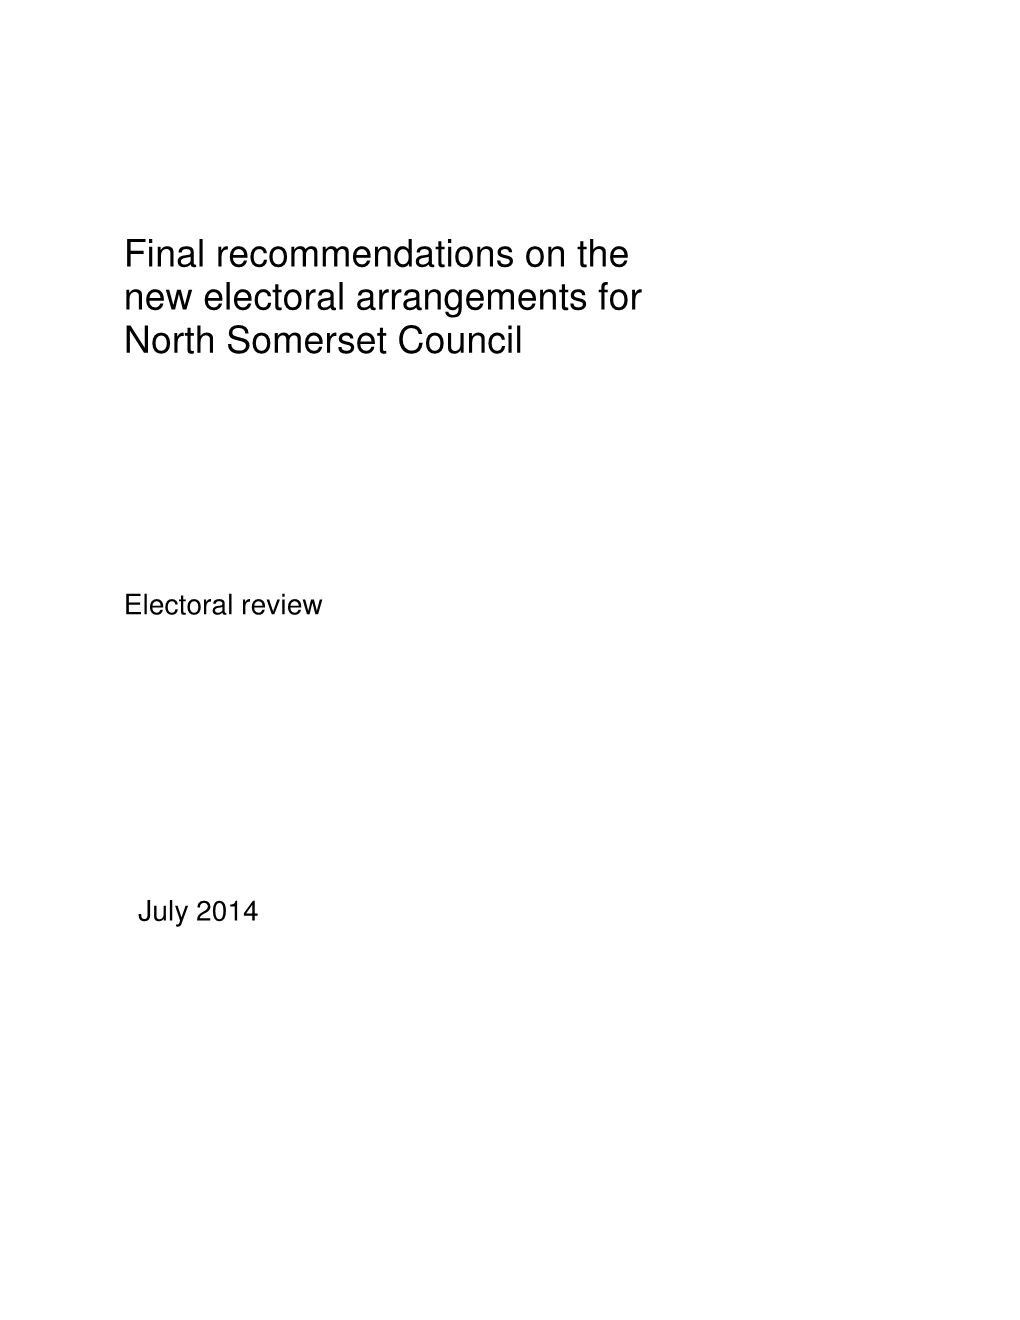 Final Recommendations on the New Electoral Arrangements for North Somerset Council